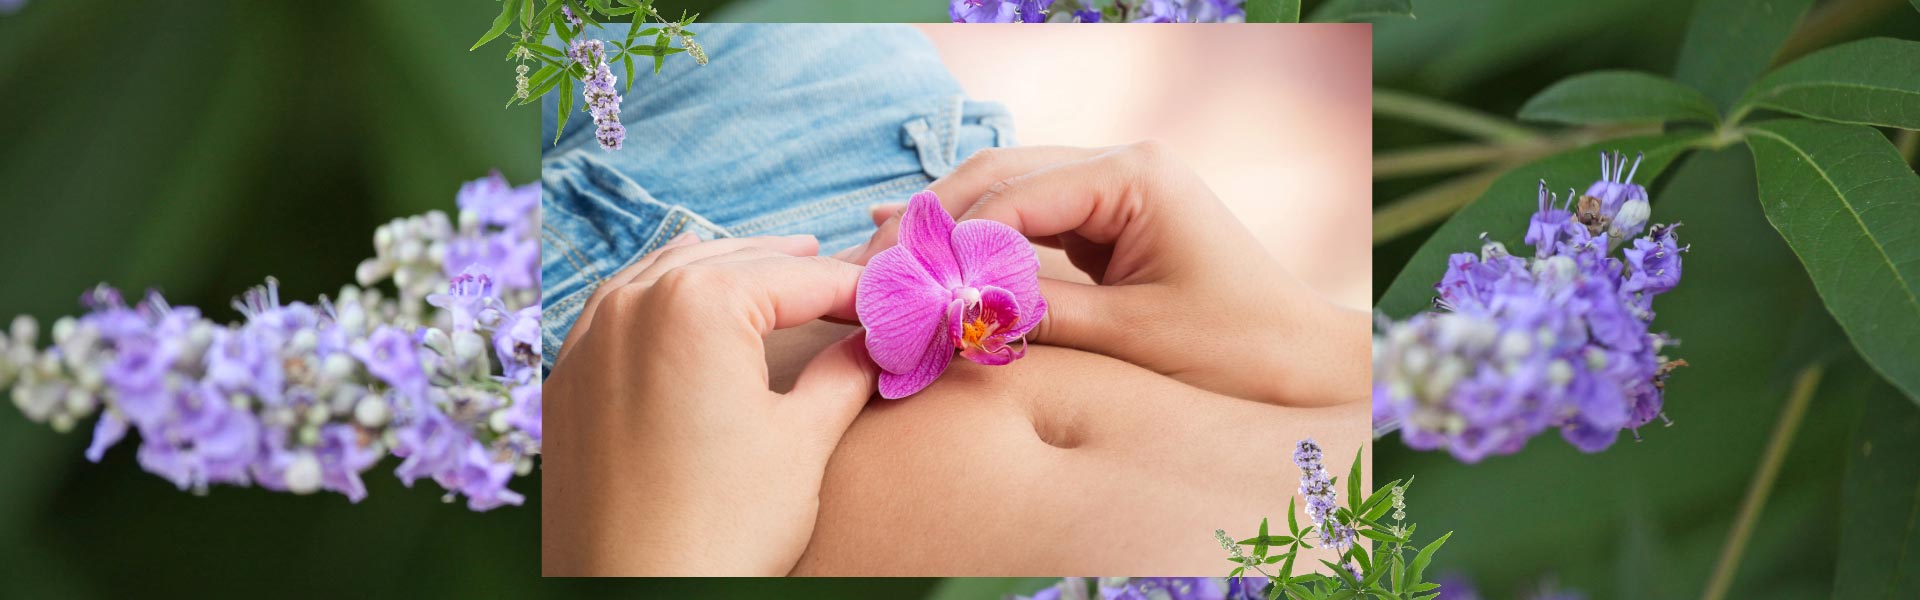 Image of a woman's stomach with hands holding a lily flower over her ovaries